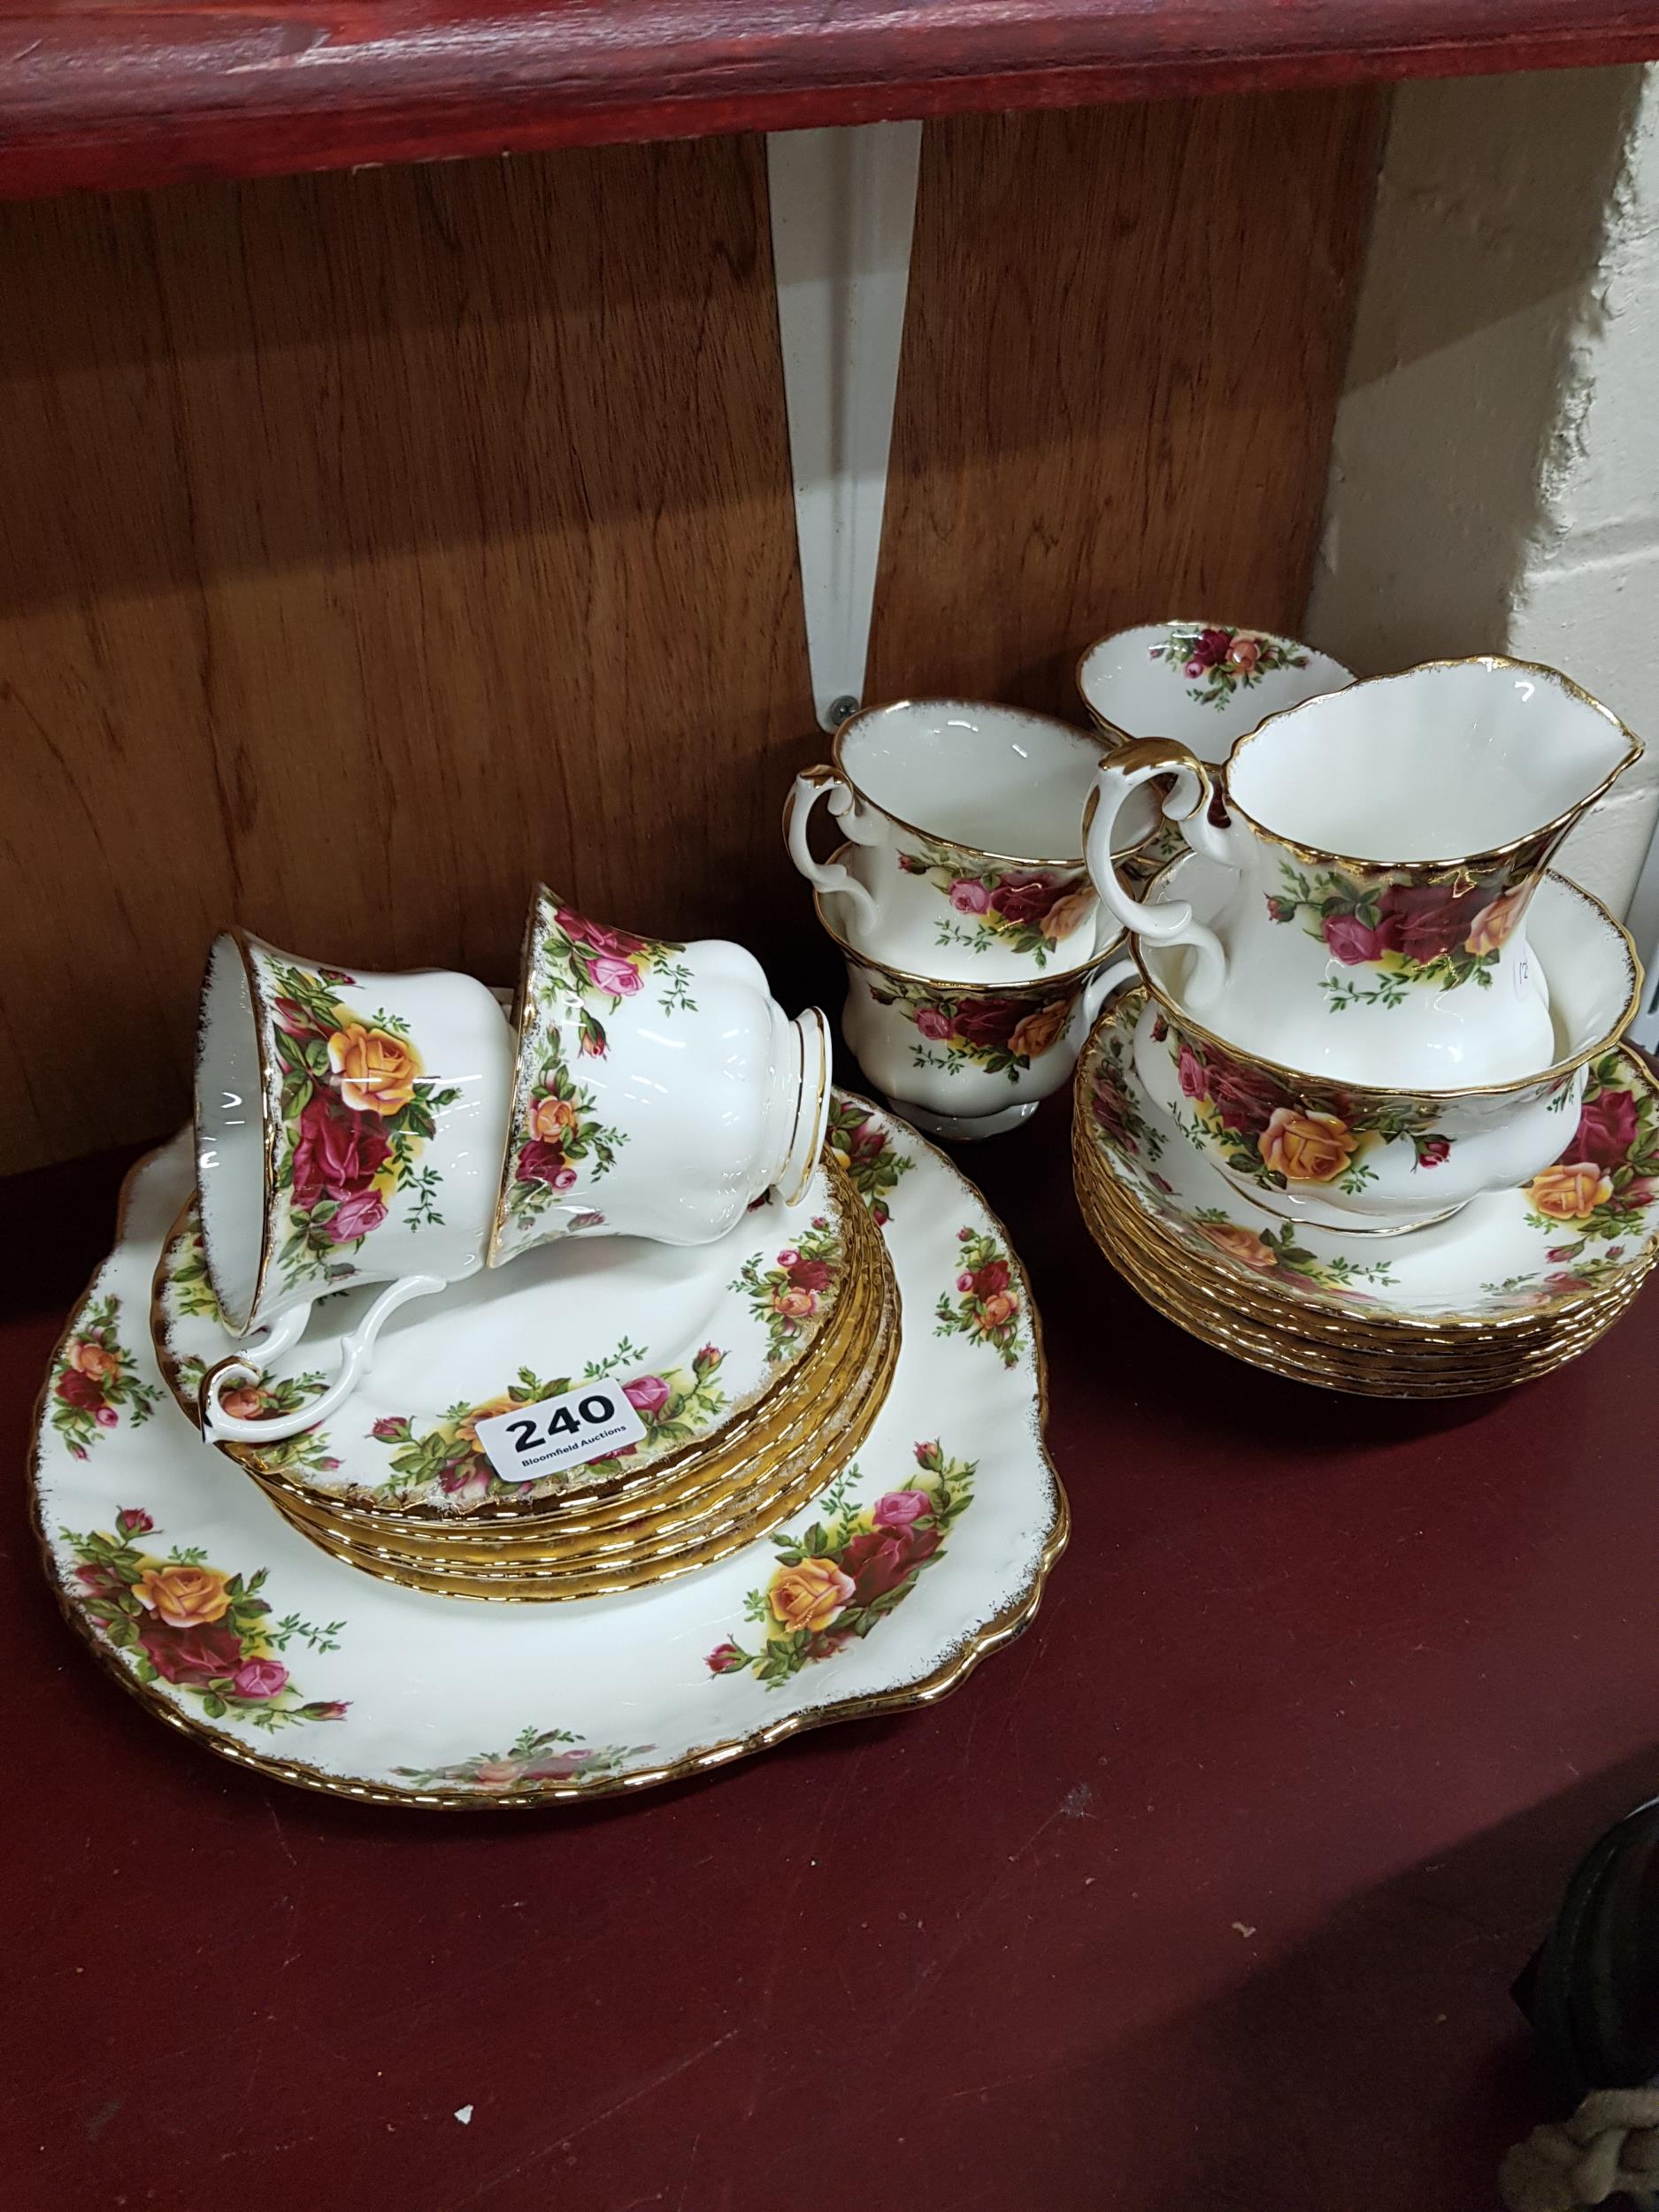 21 PIECE OLD COUNTRY ROSE TEA SET